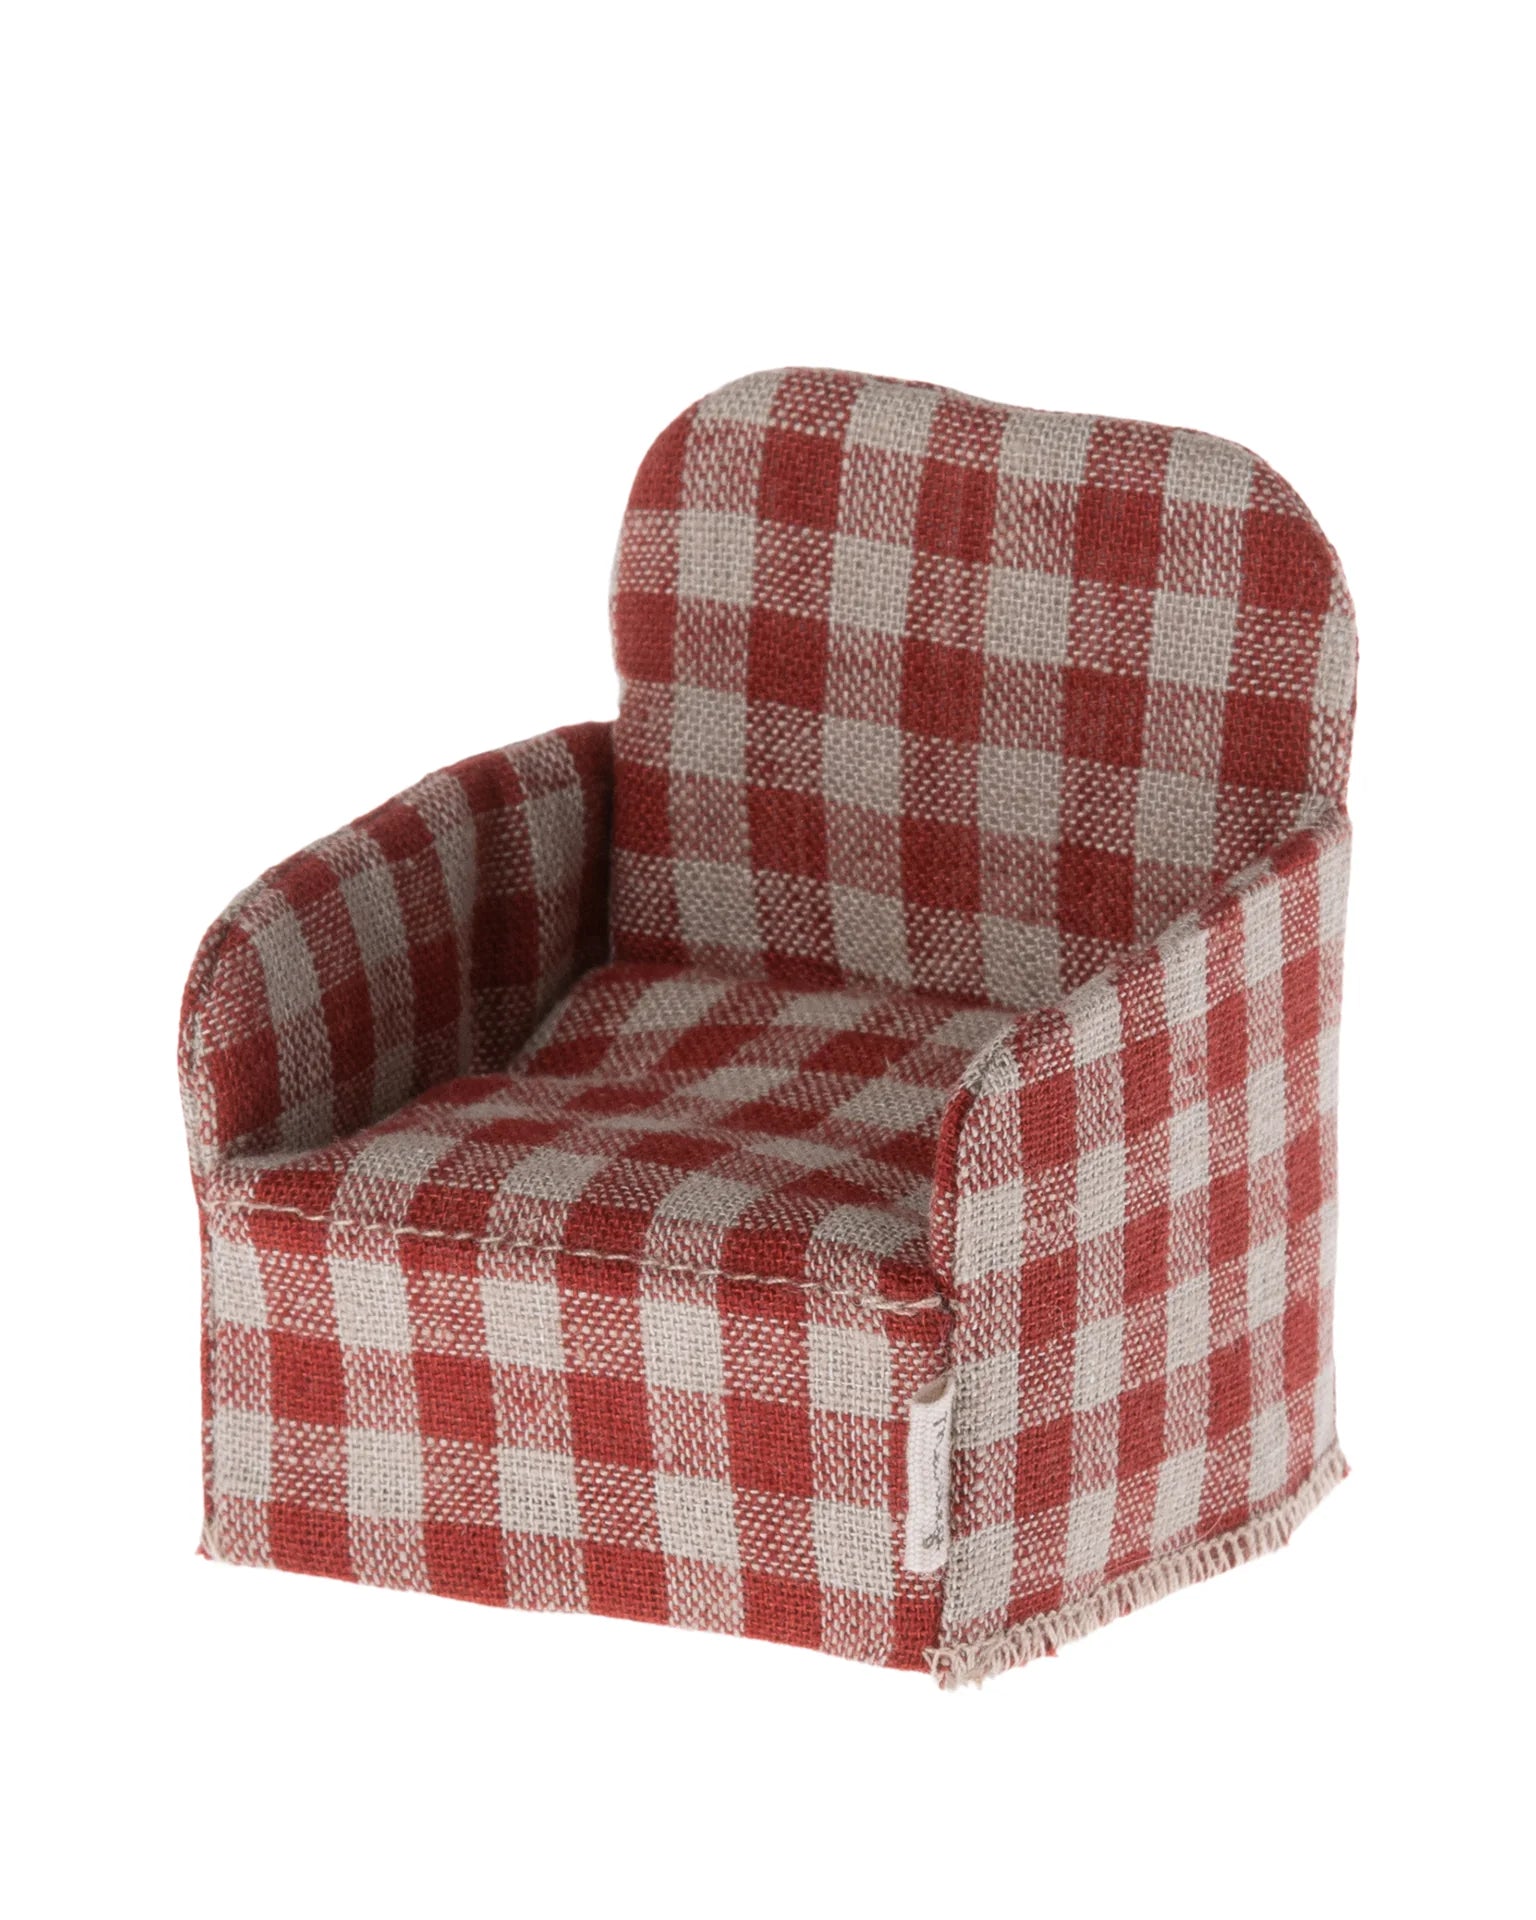 Maileg Mouse Chair in Red